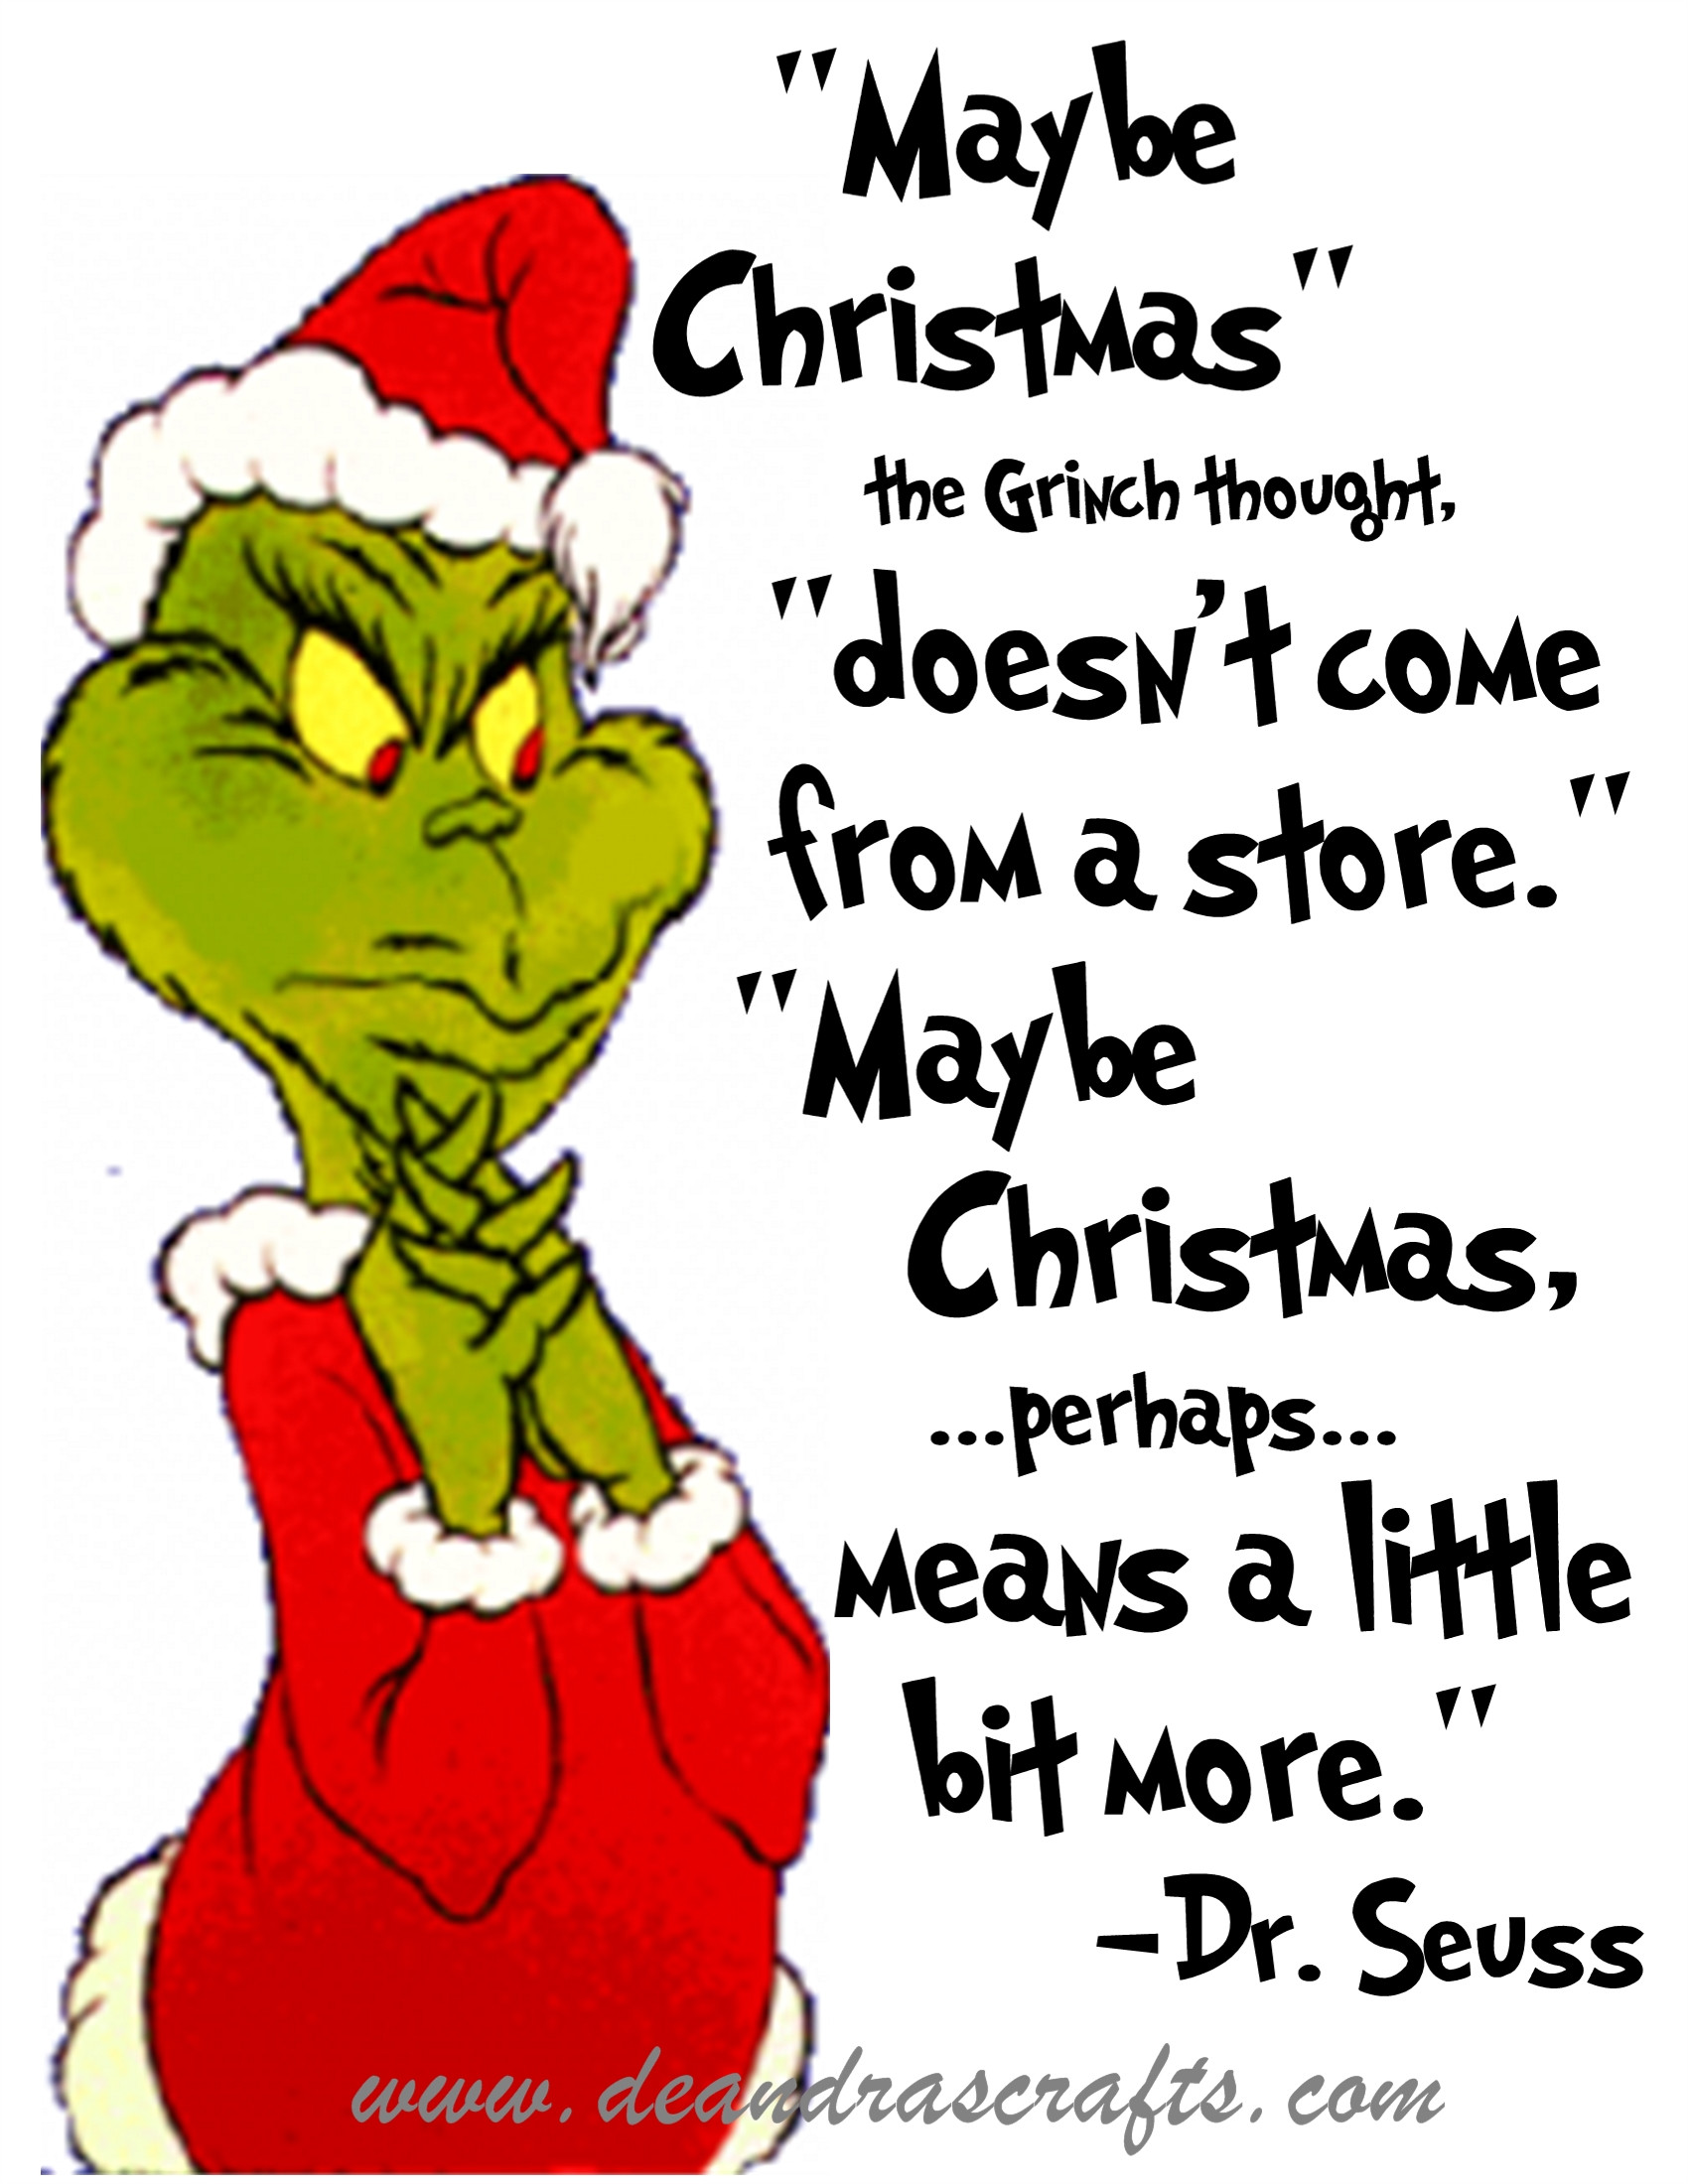 How The Grinch Stole Christmas Book Quotes
 How The Grinch Stole Christmas Book Quotes QuotesGram